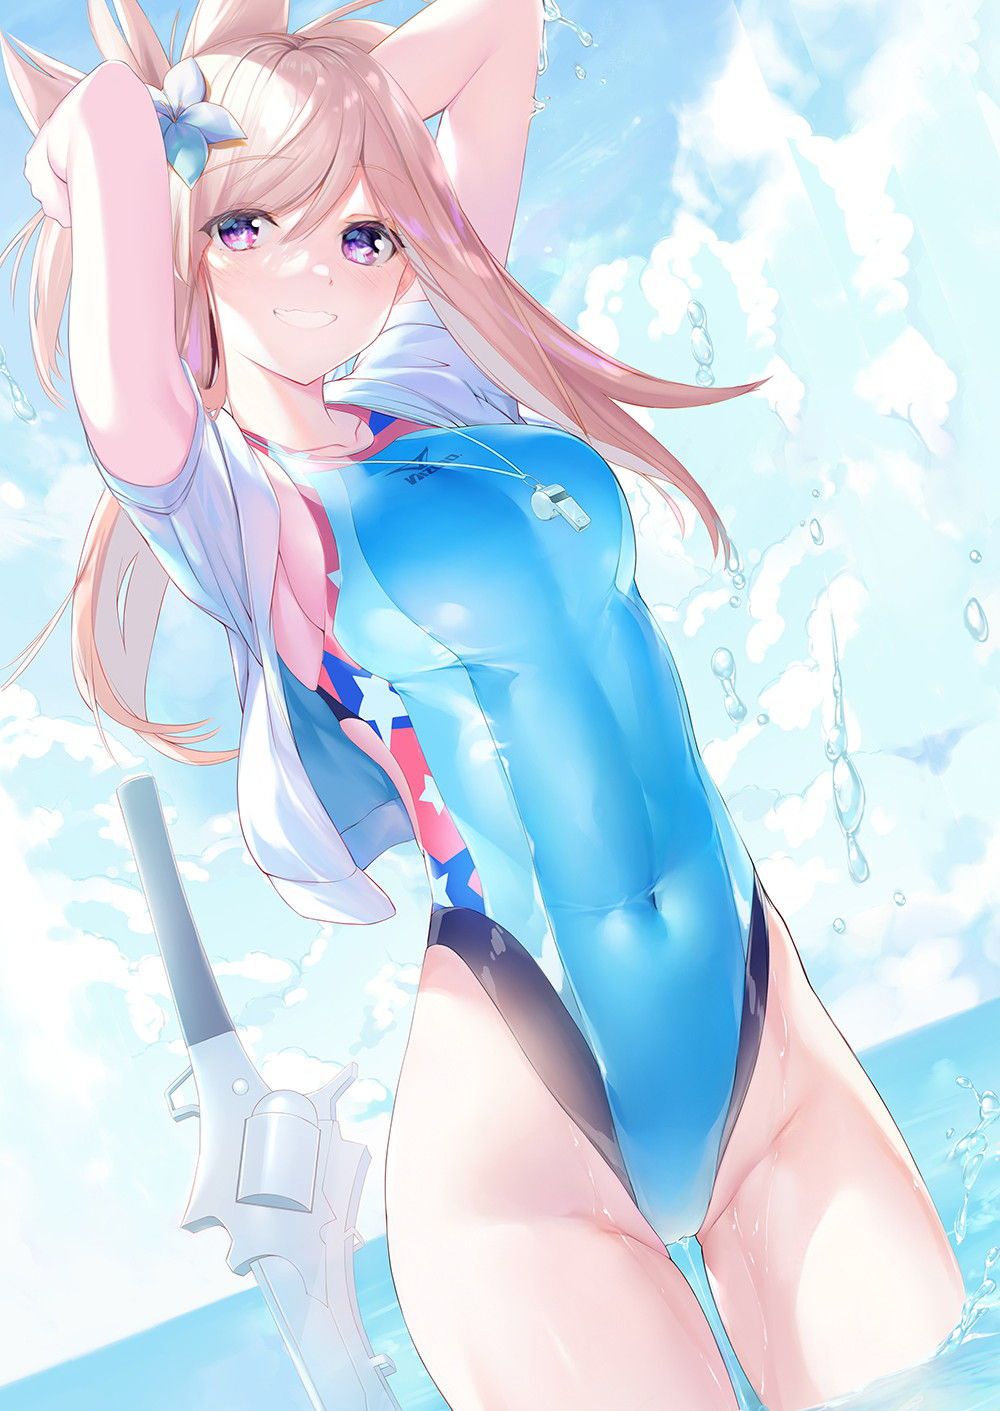 It's an erotic image of a competitive swimsuit! 7